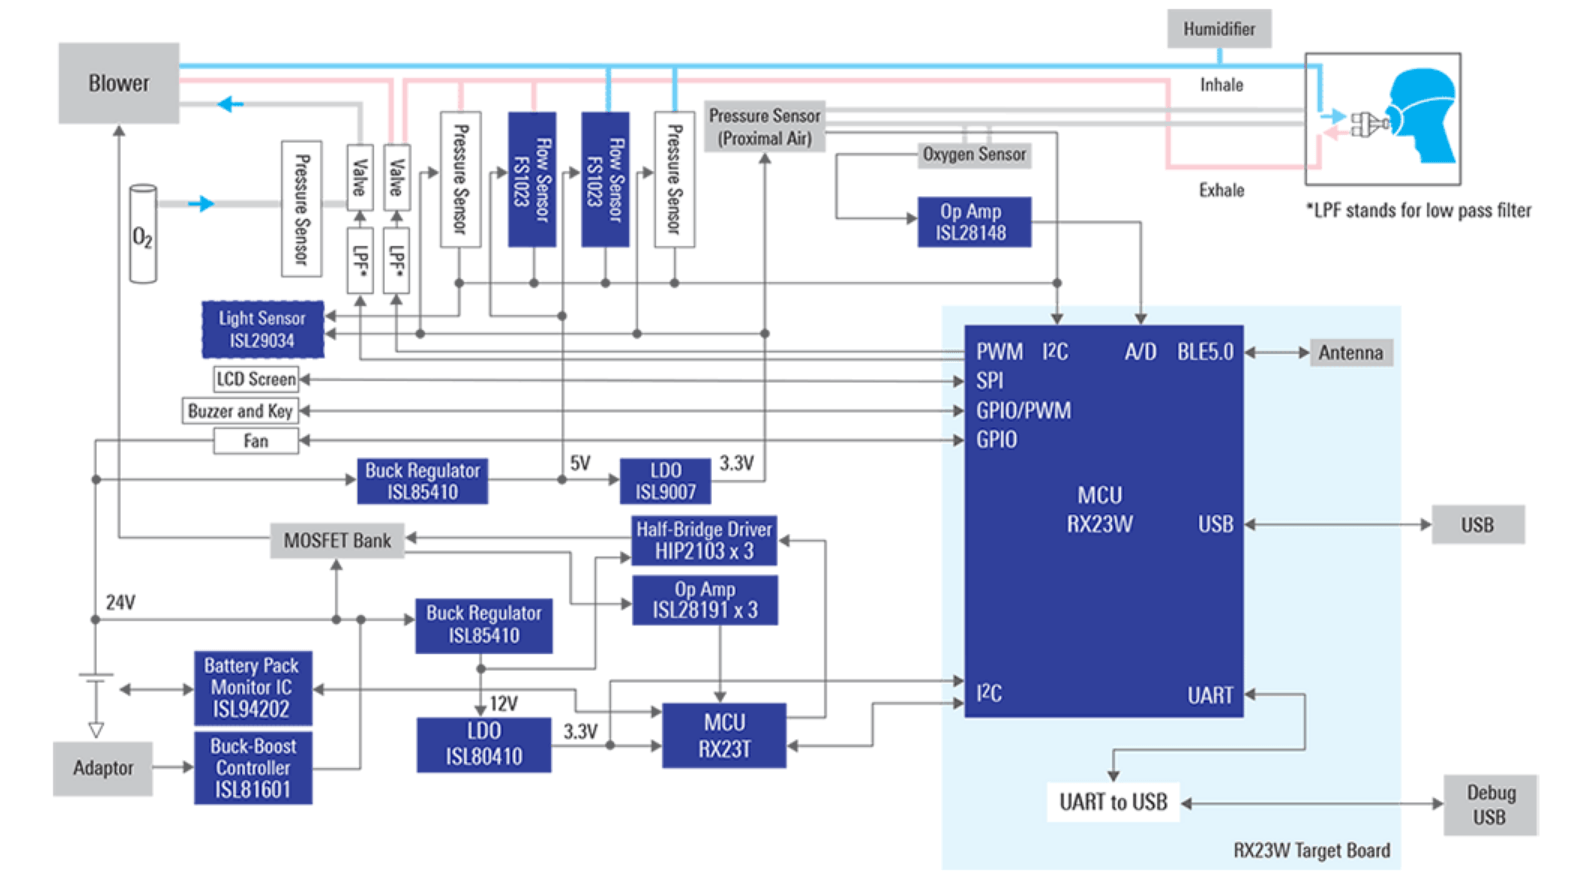 Renesas creates open-source ventilator system reference design to fight COVID-19 pandemic-SemiMedia